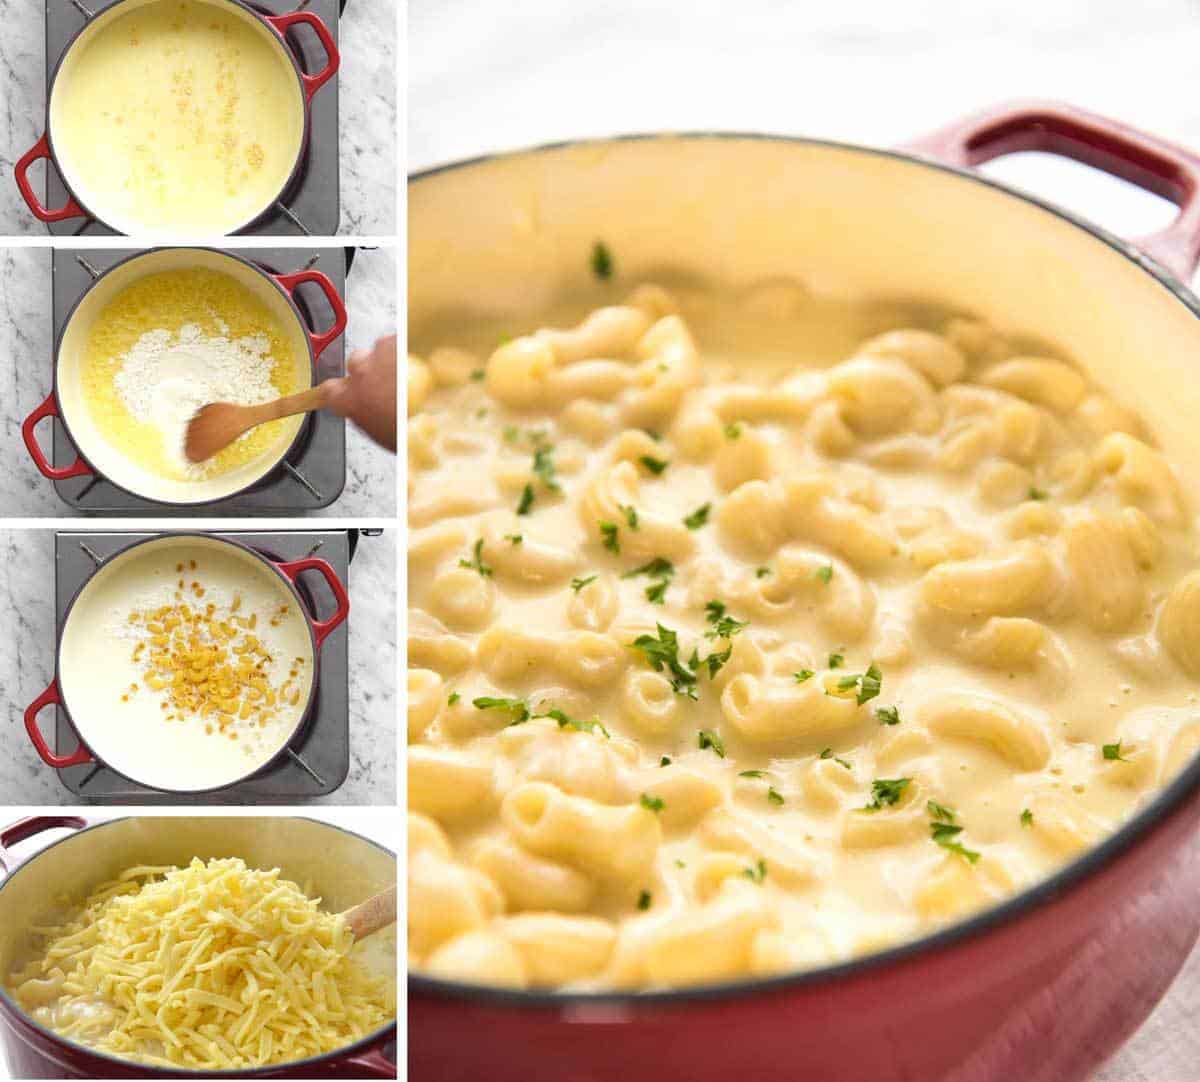 Making cheese sauce for macaroni and cheese